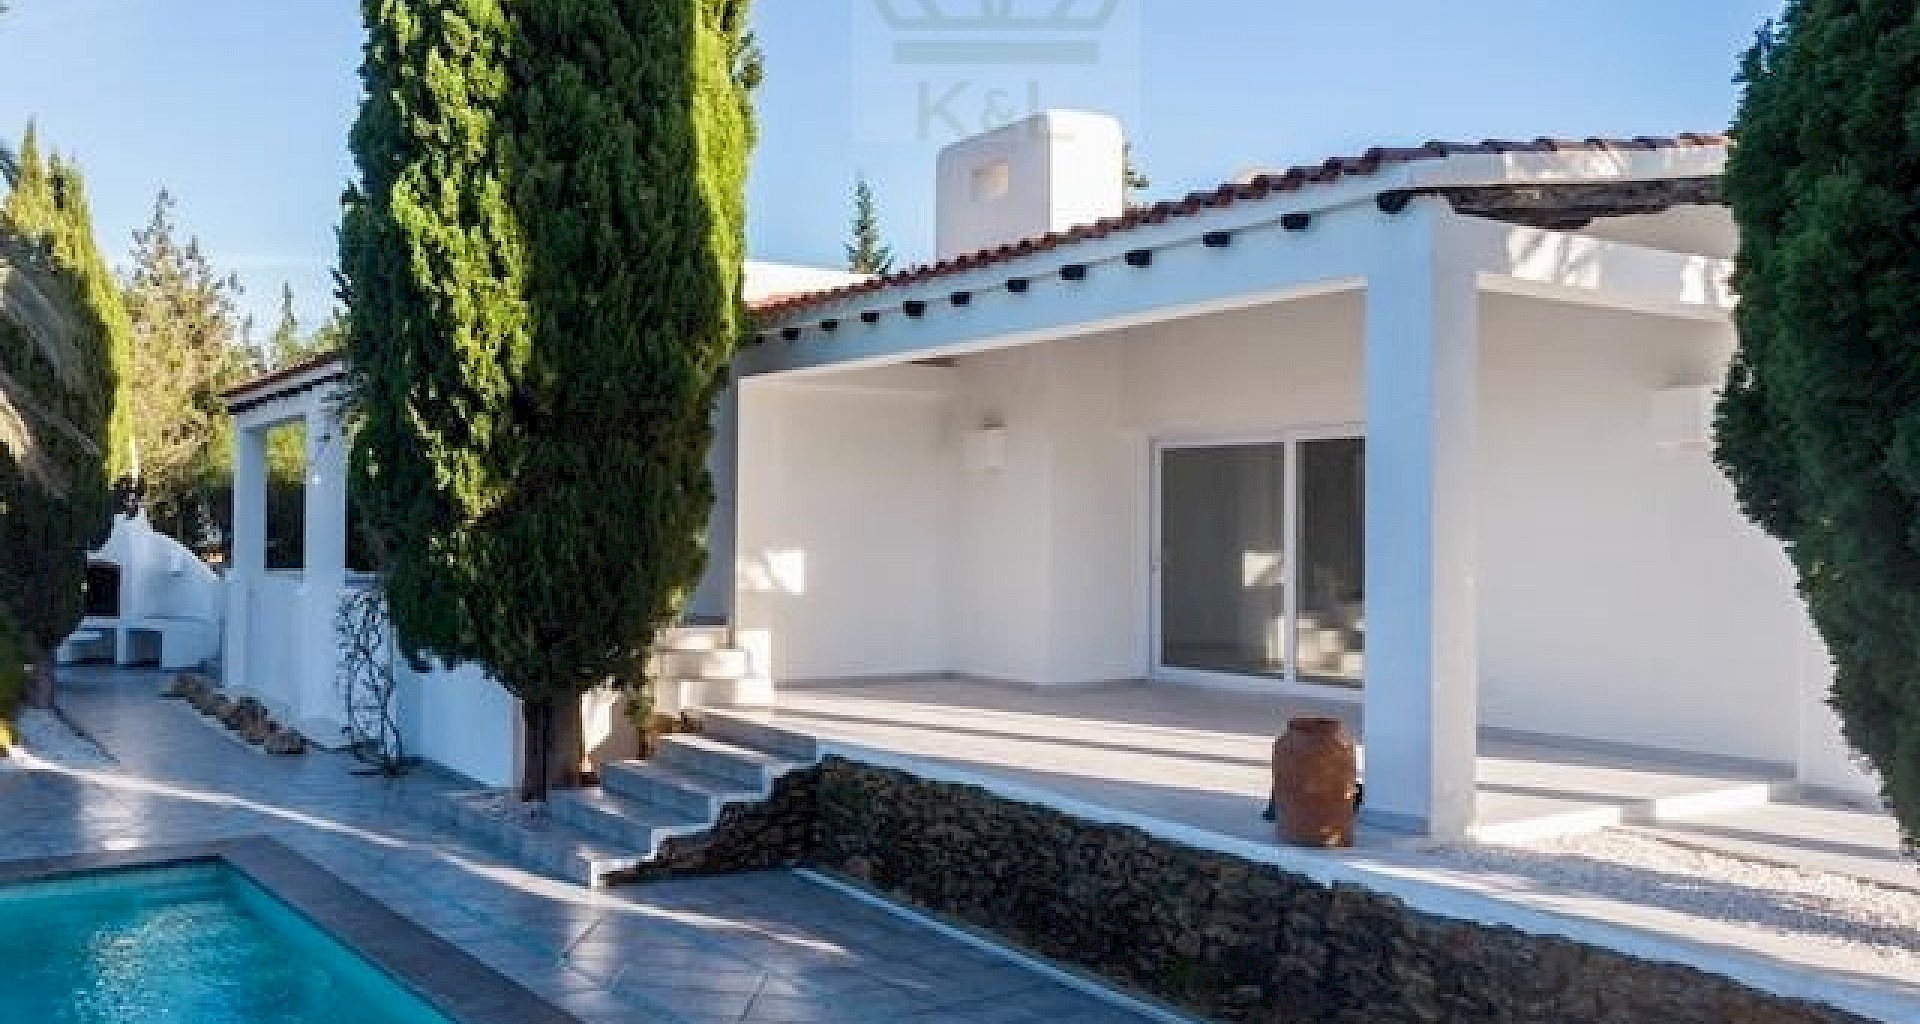 KROHN & LUEDEMANN Completely renovated house in Ibiza with pool and lots of privacy Benimussa (3)